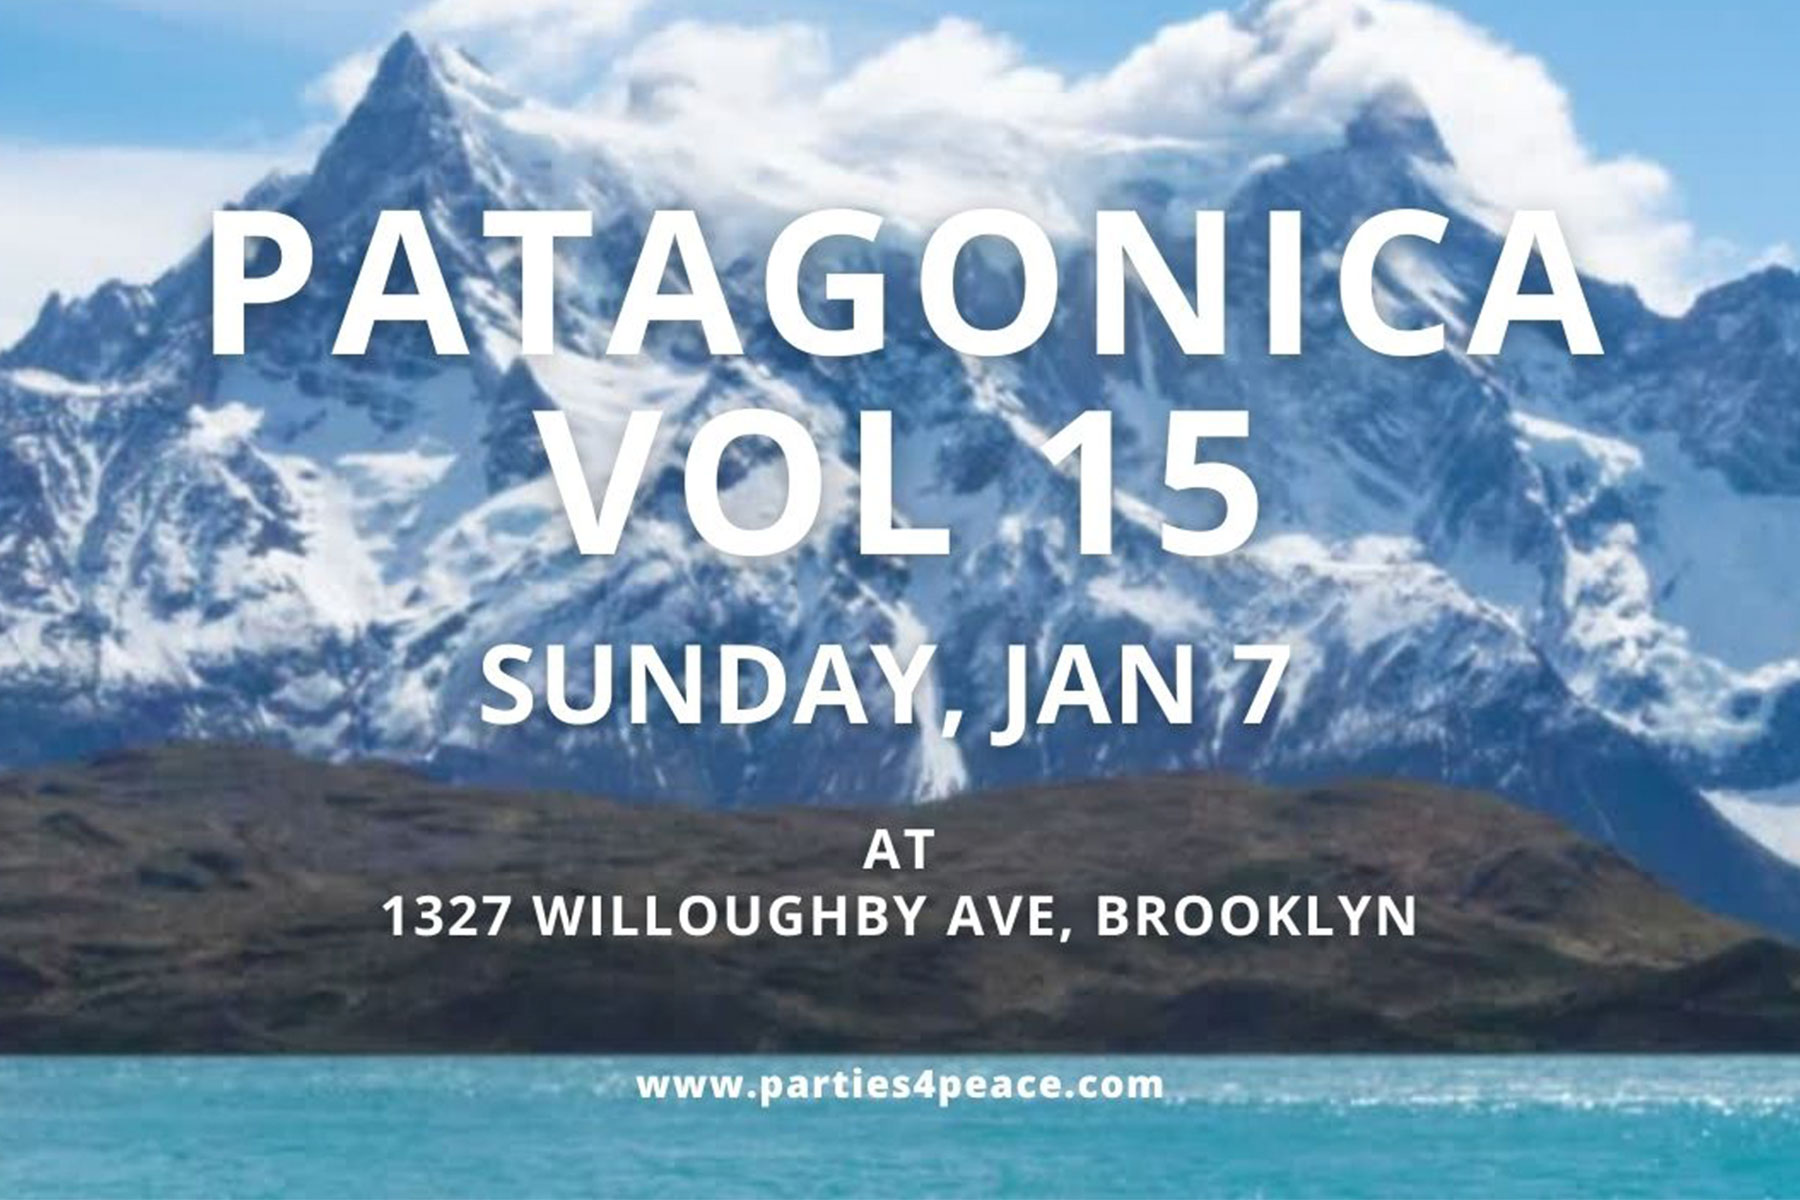 Parties4Peace celebrates 15 year anniversary of Patagonica Tour in New York